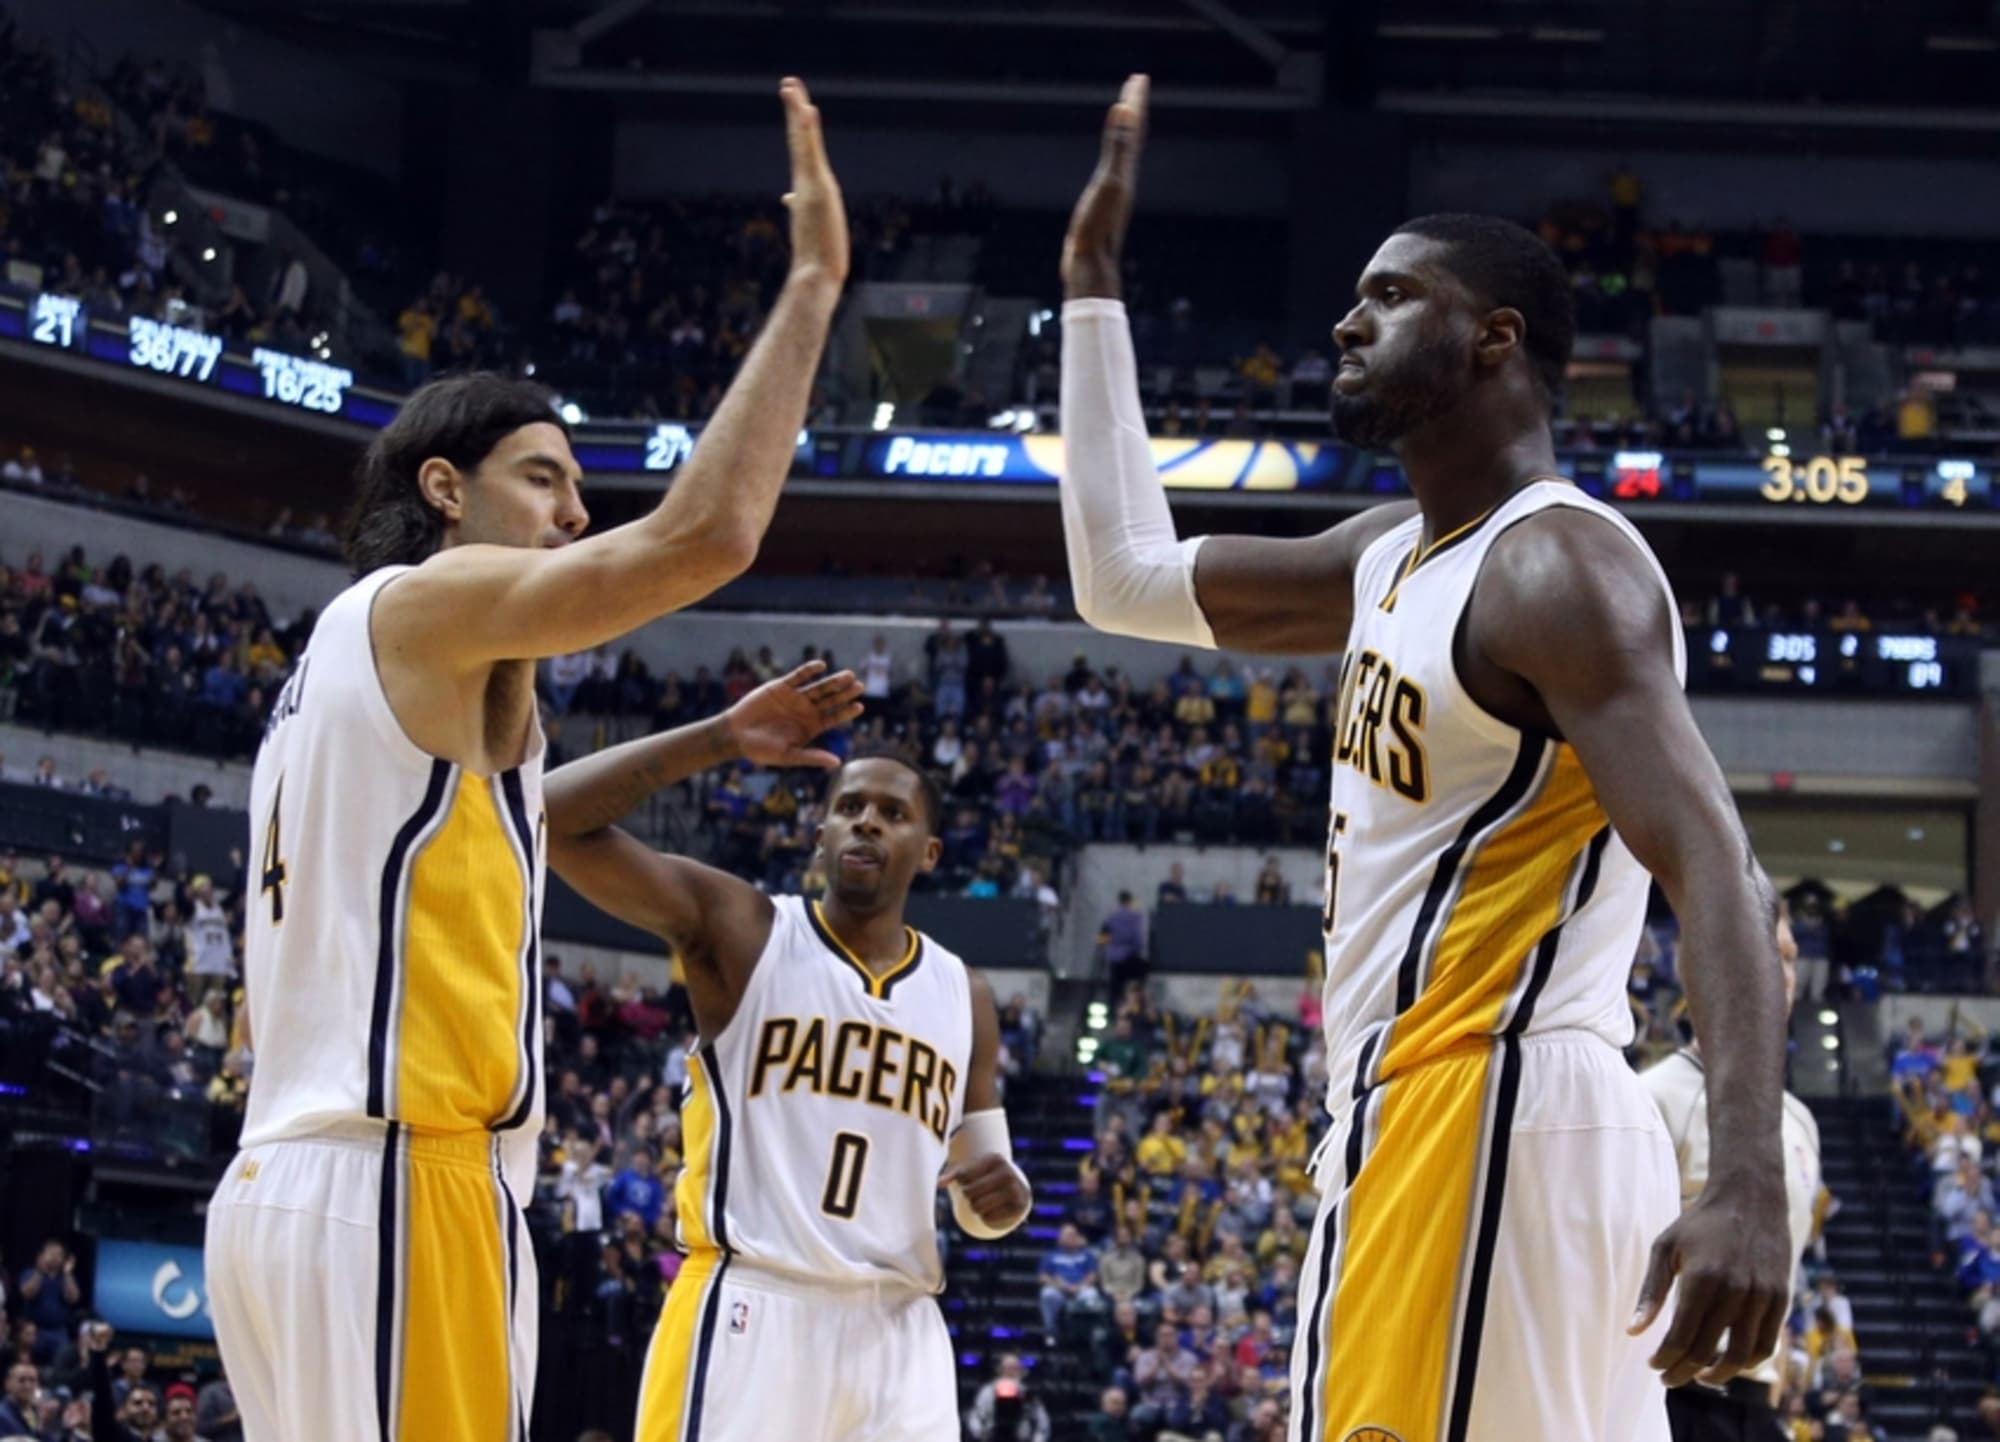 Luis Scola meshes well with Pacers